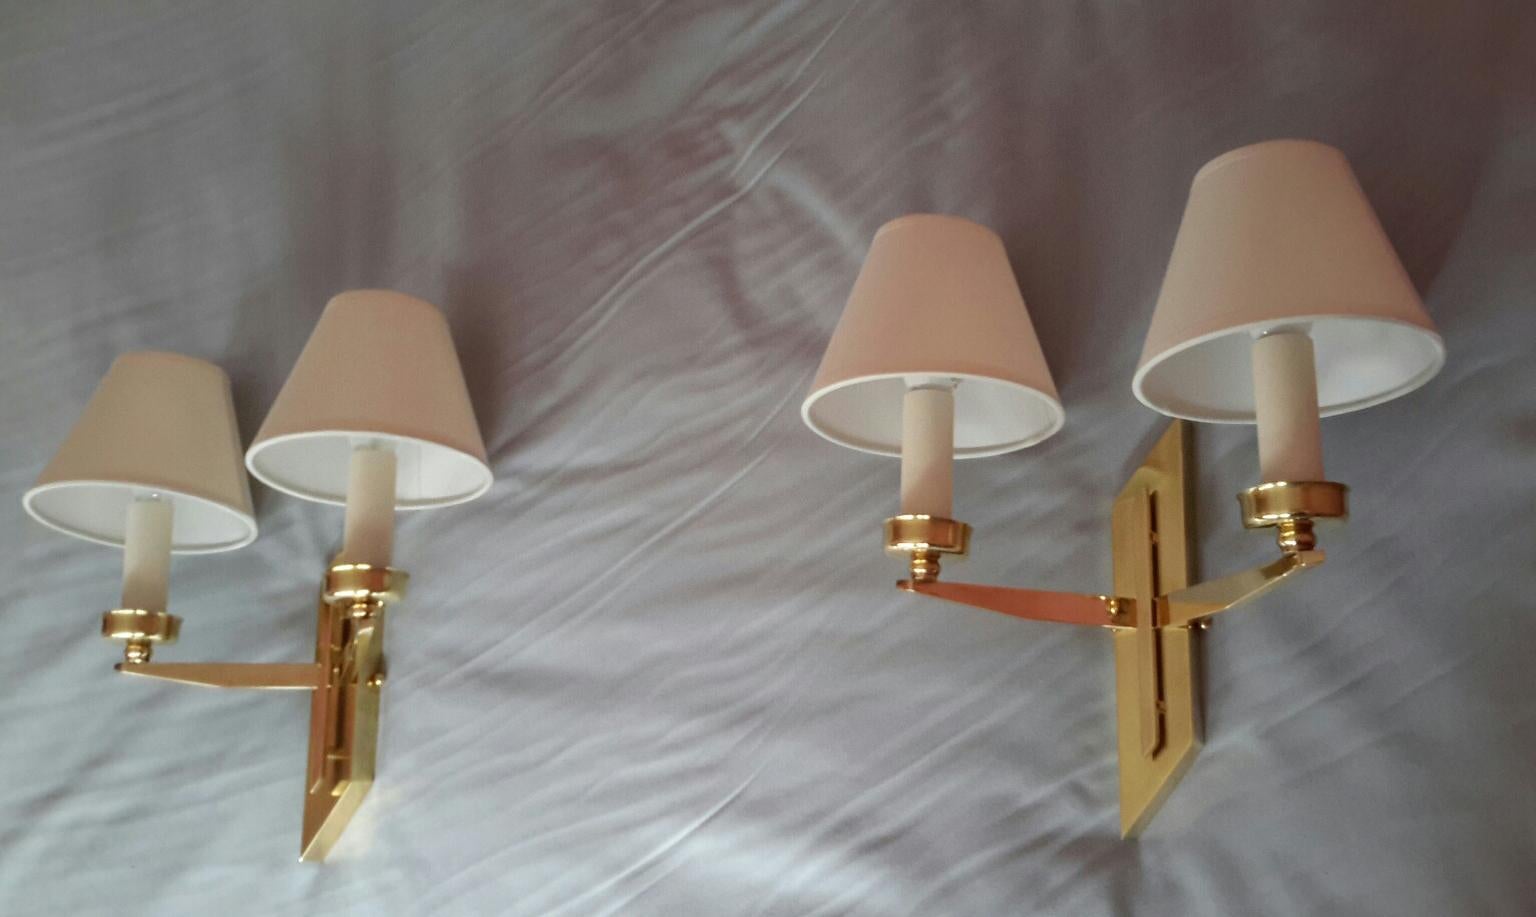 Pair of French Mid-Century Modern Sconces by Maison Lunel, 1950 For Sale 3